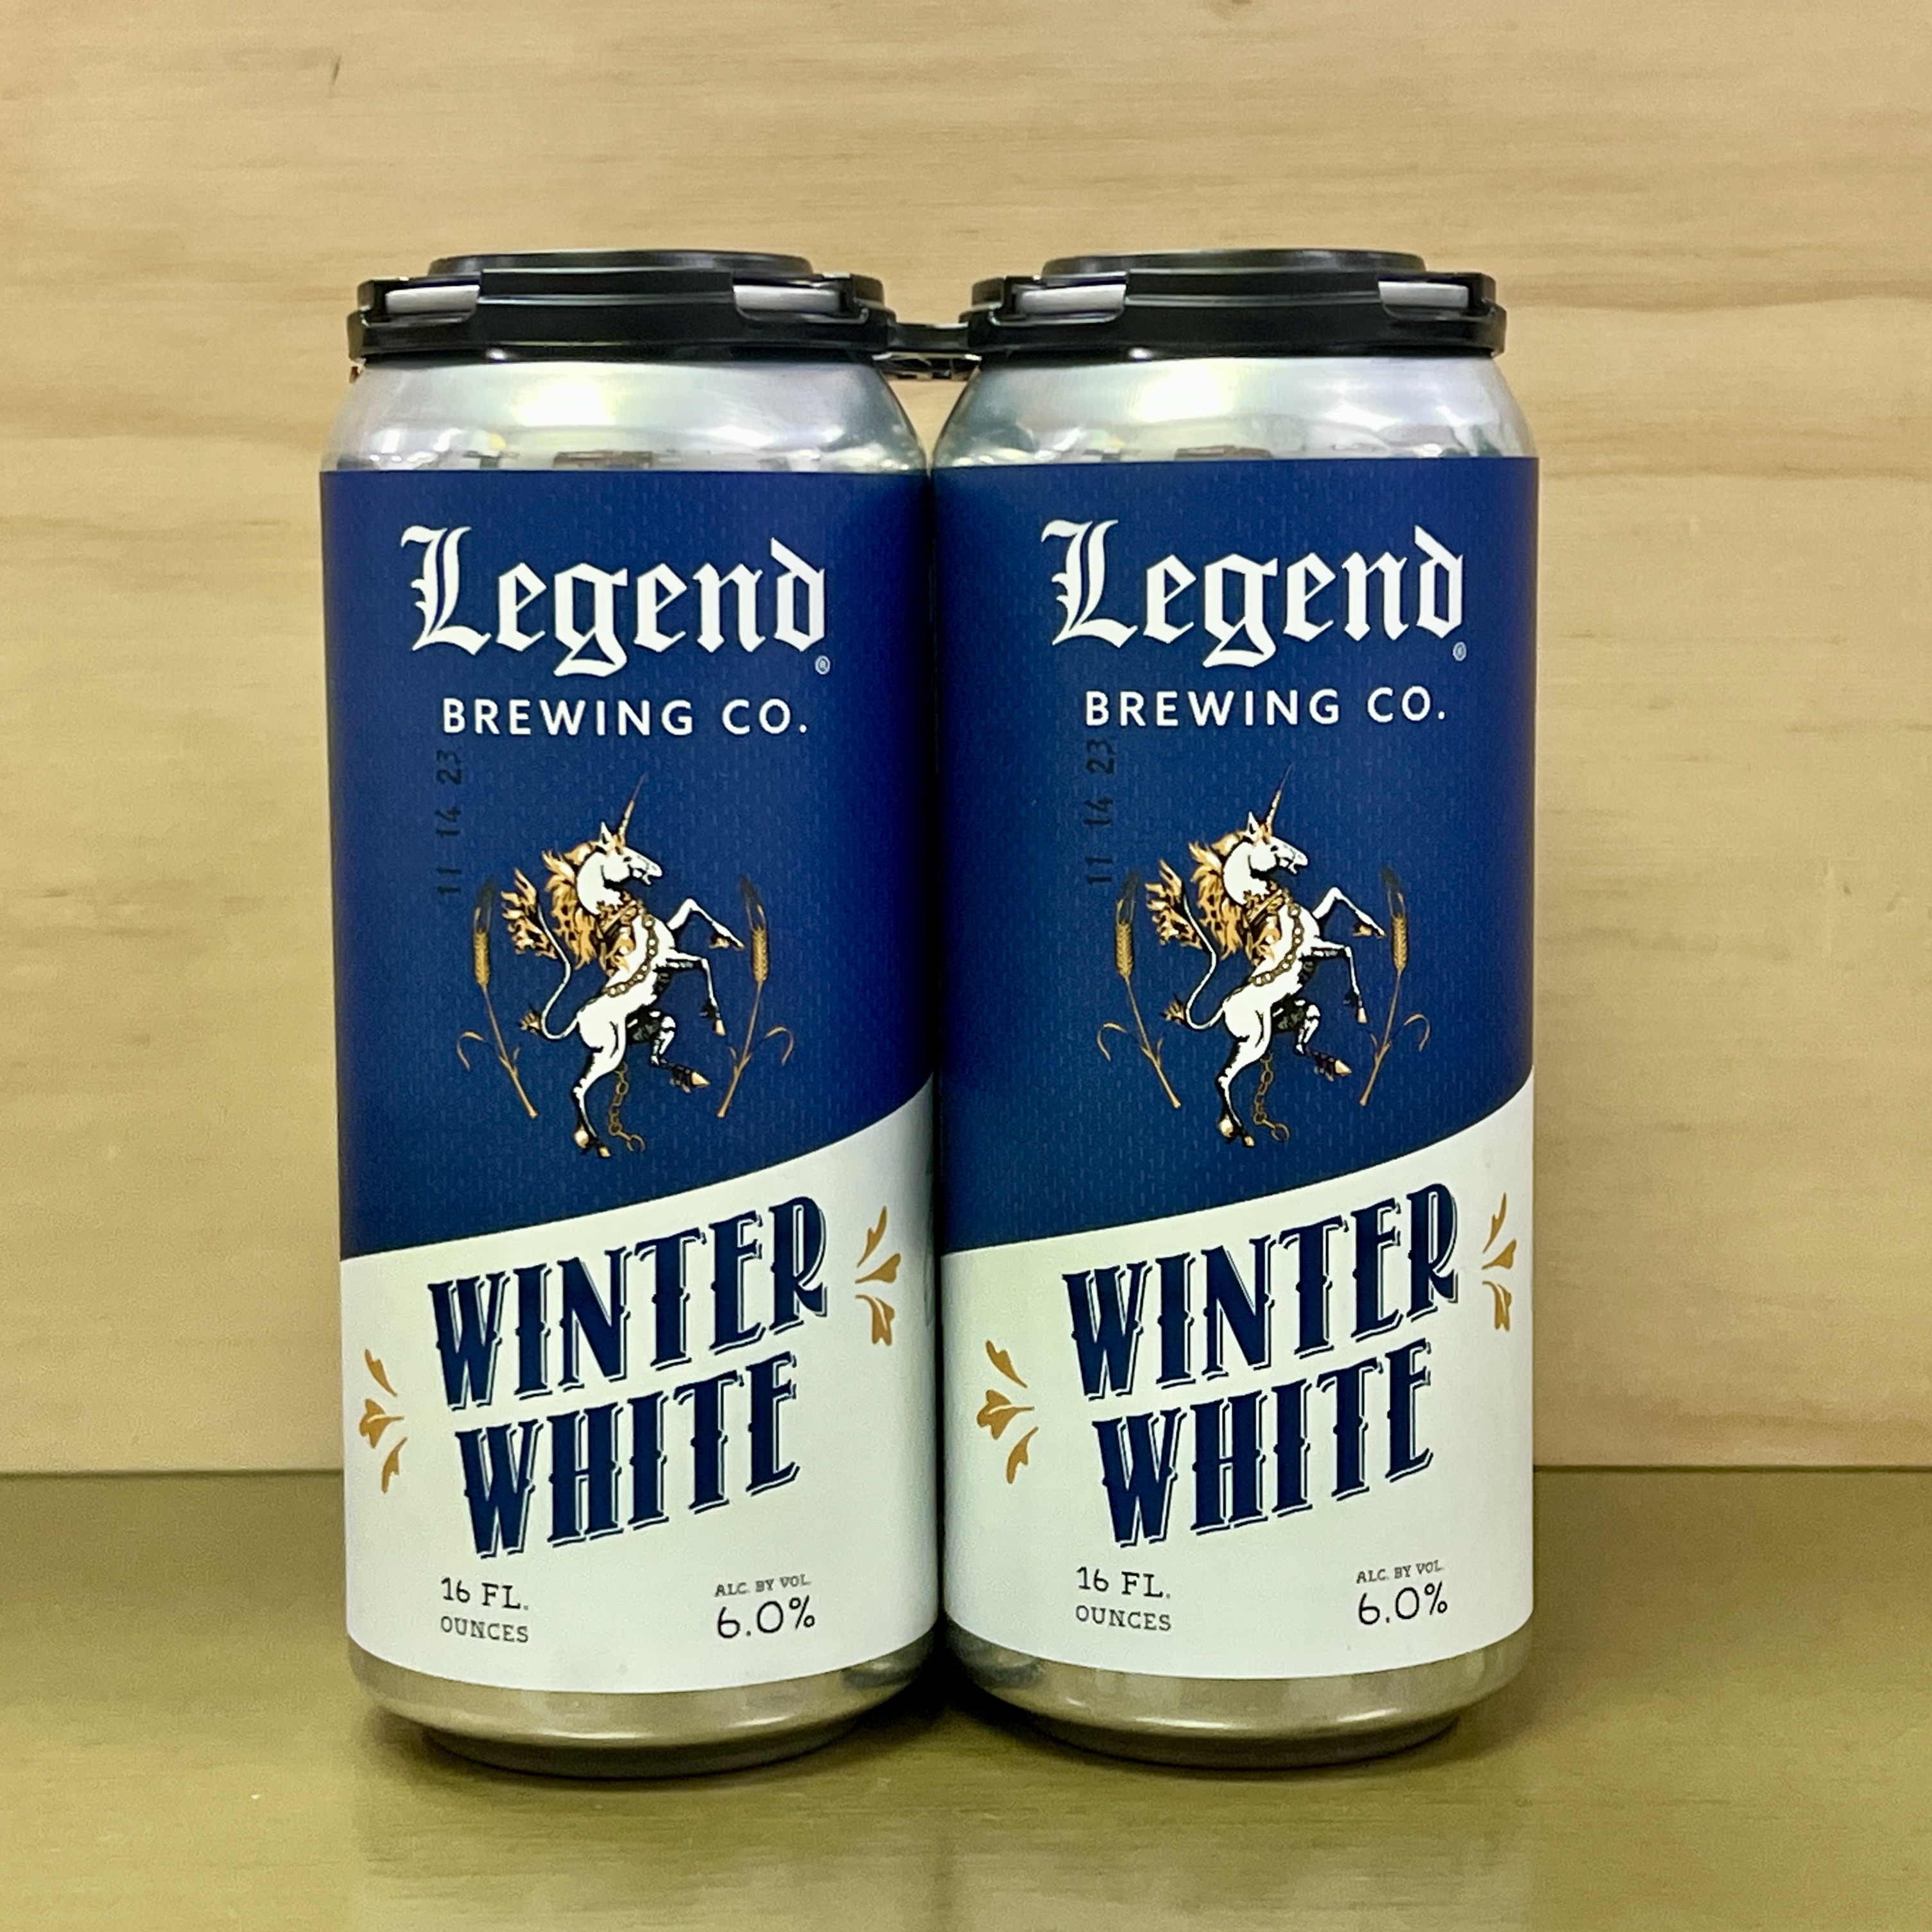 Legend Winter White Belgian style Wit Beer 4 x 16oz cans